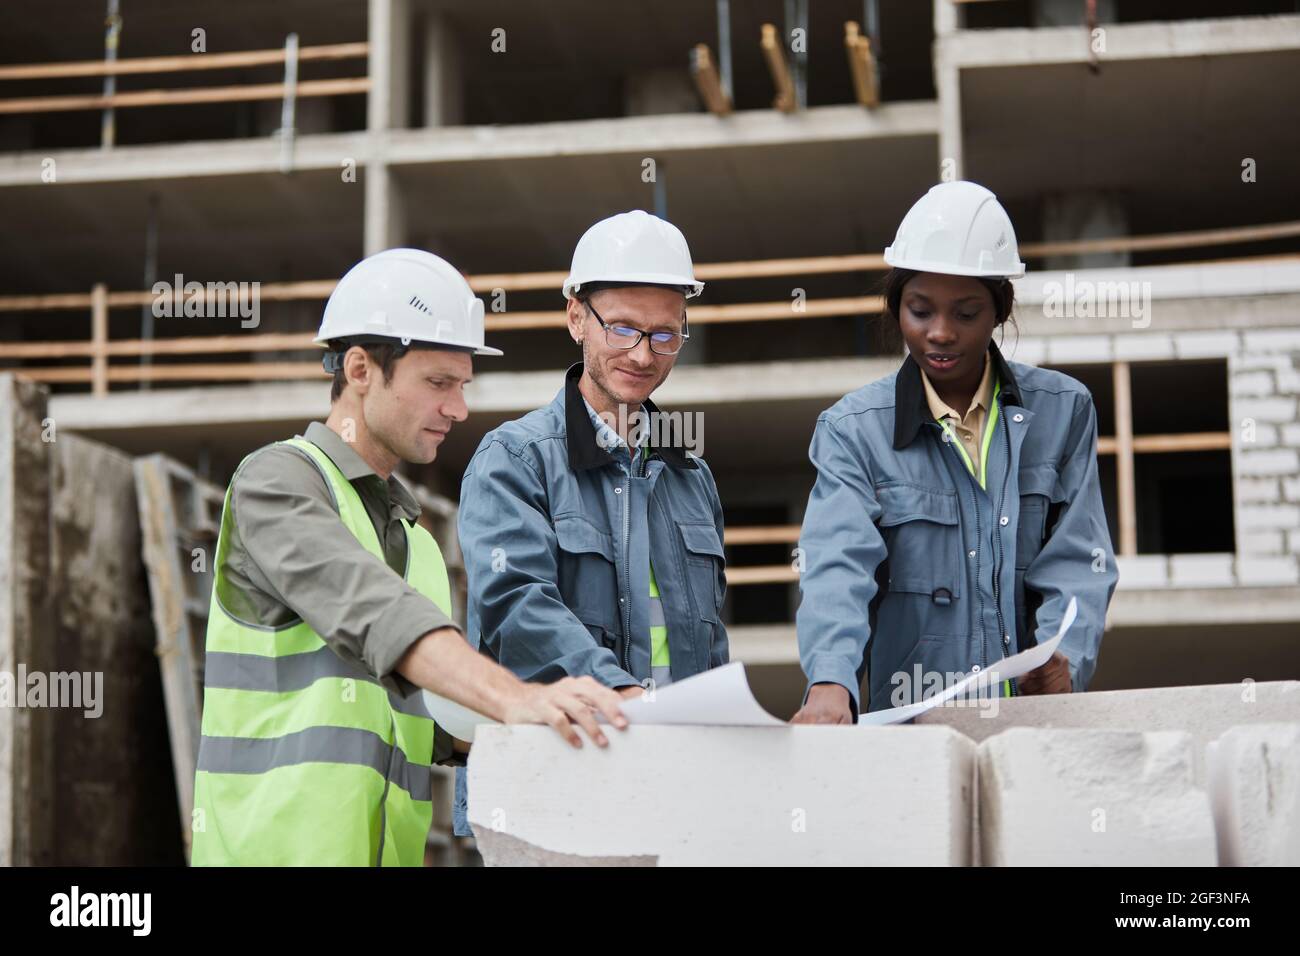 Waist up portrait of workers discussing floor plans at construction site, copy space Stock Photo